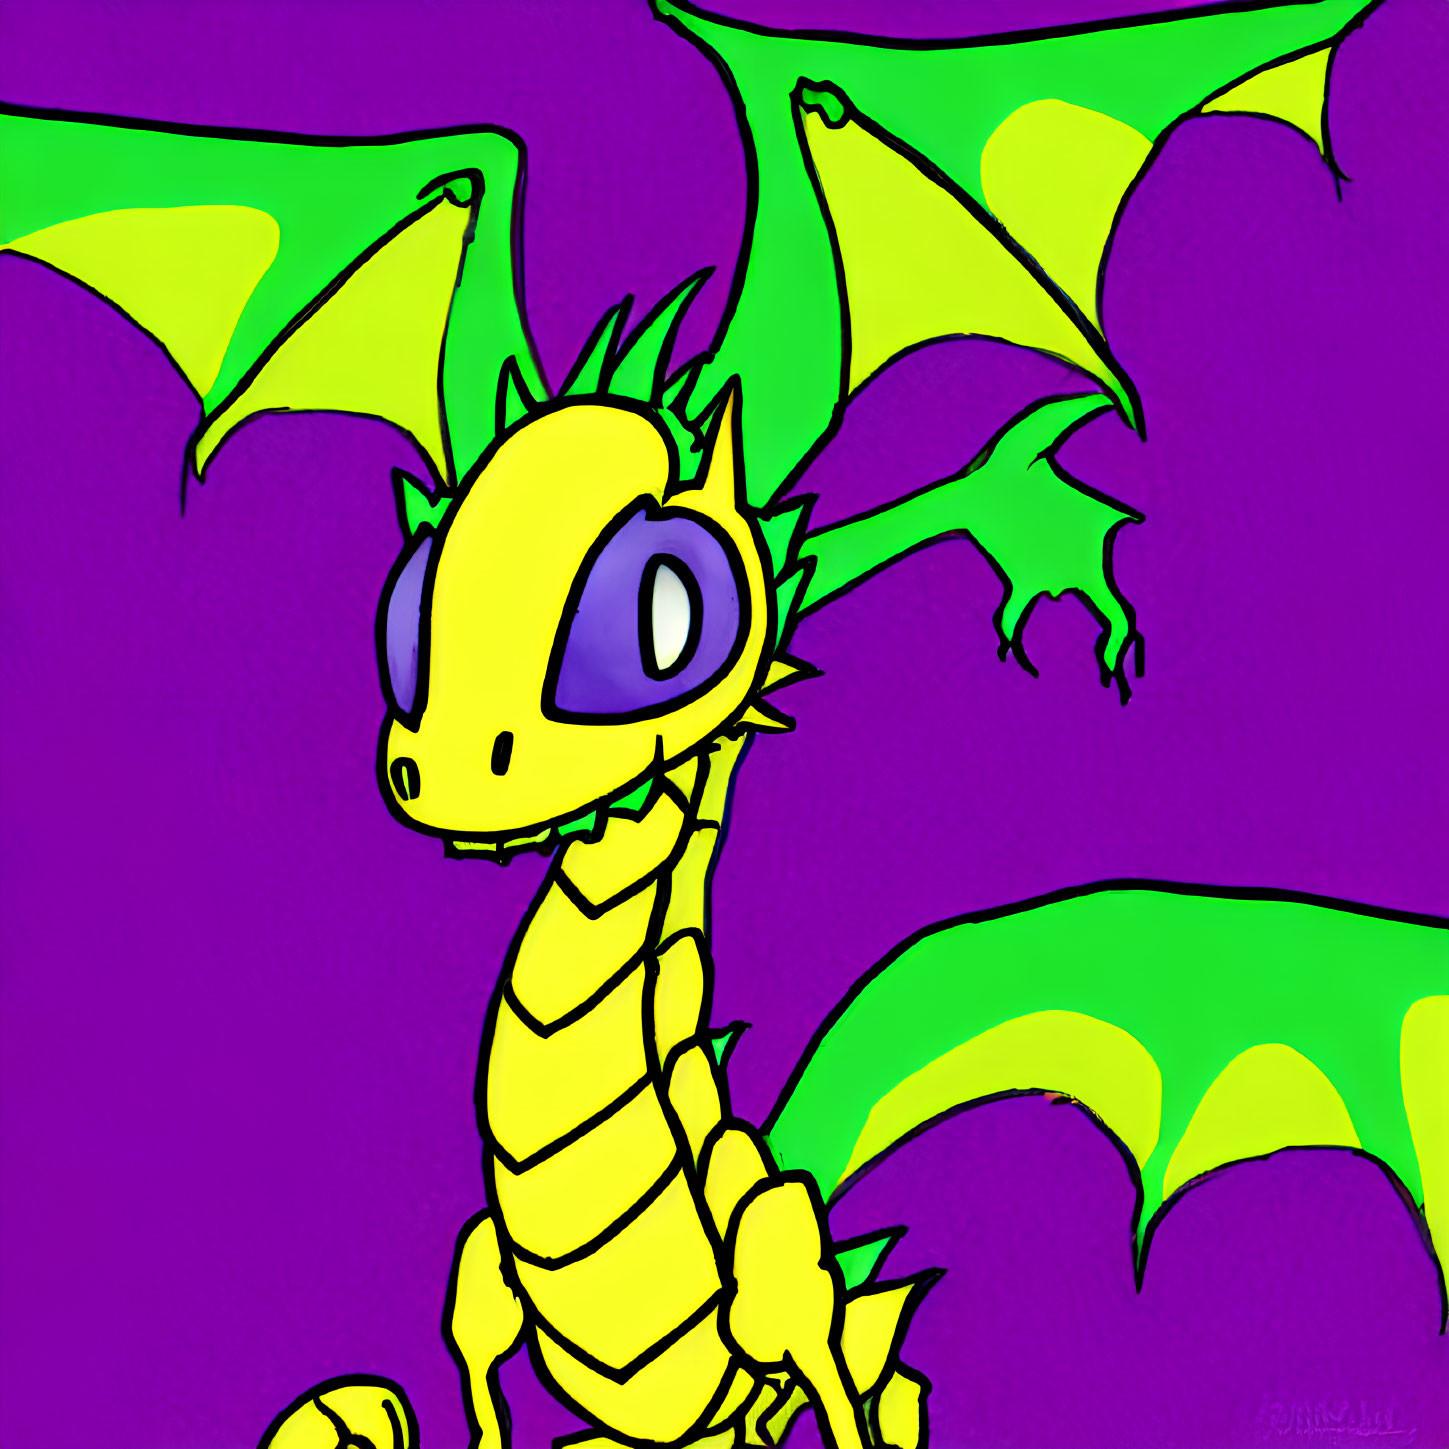 Smiling Cartoon Dragon with Yellow Scales and Green Wings